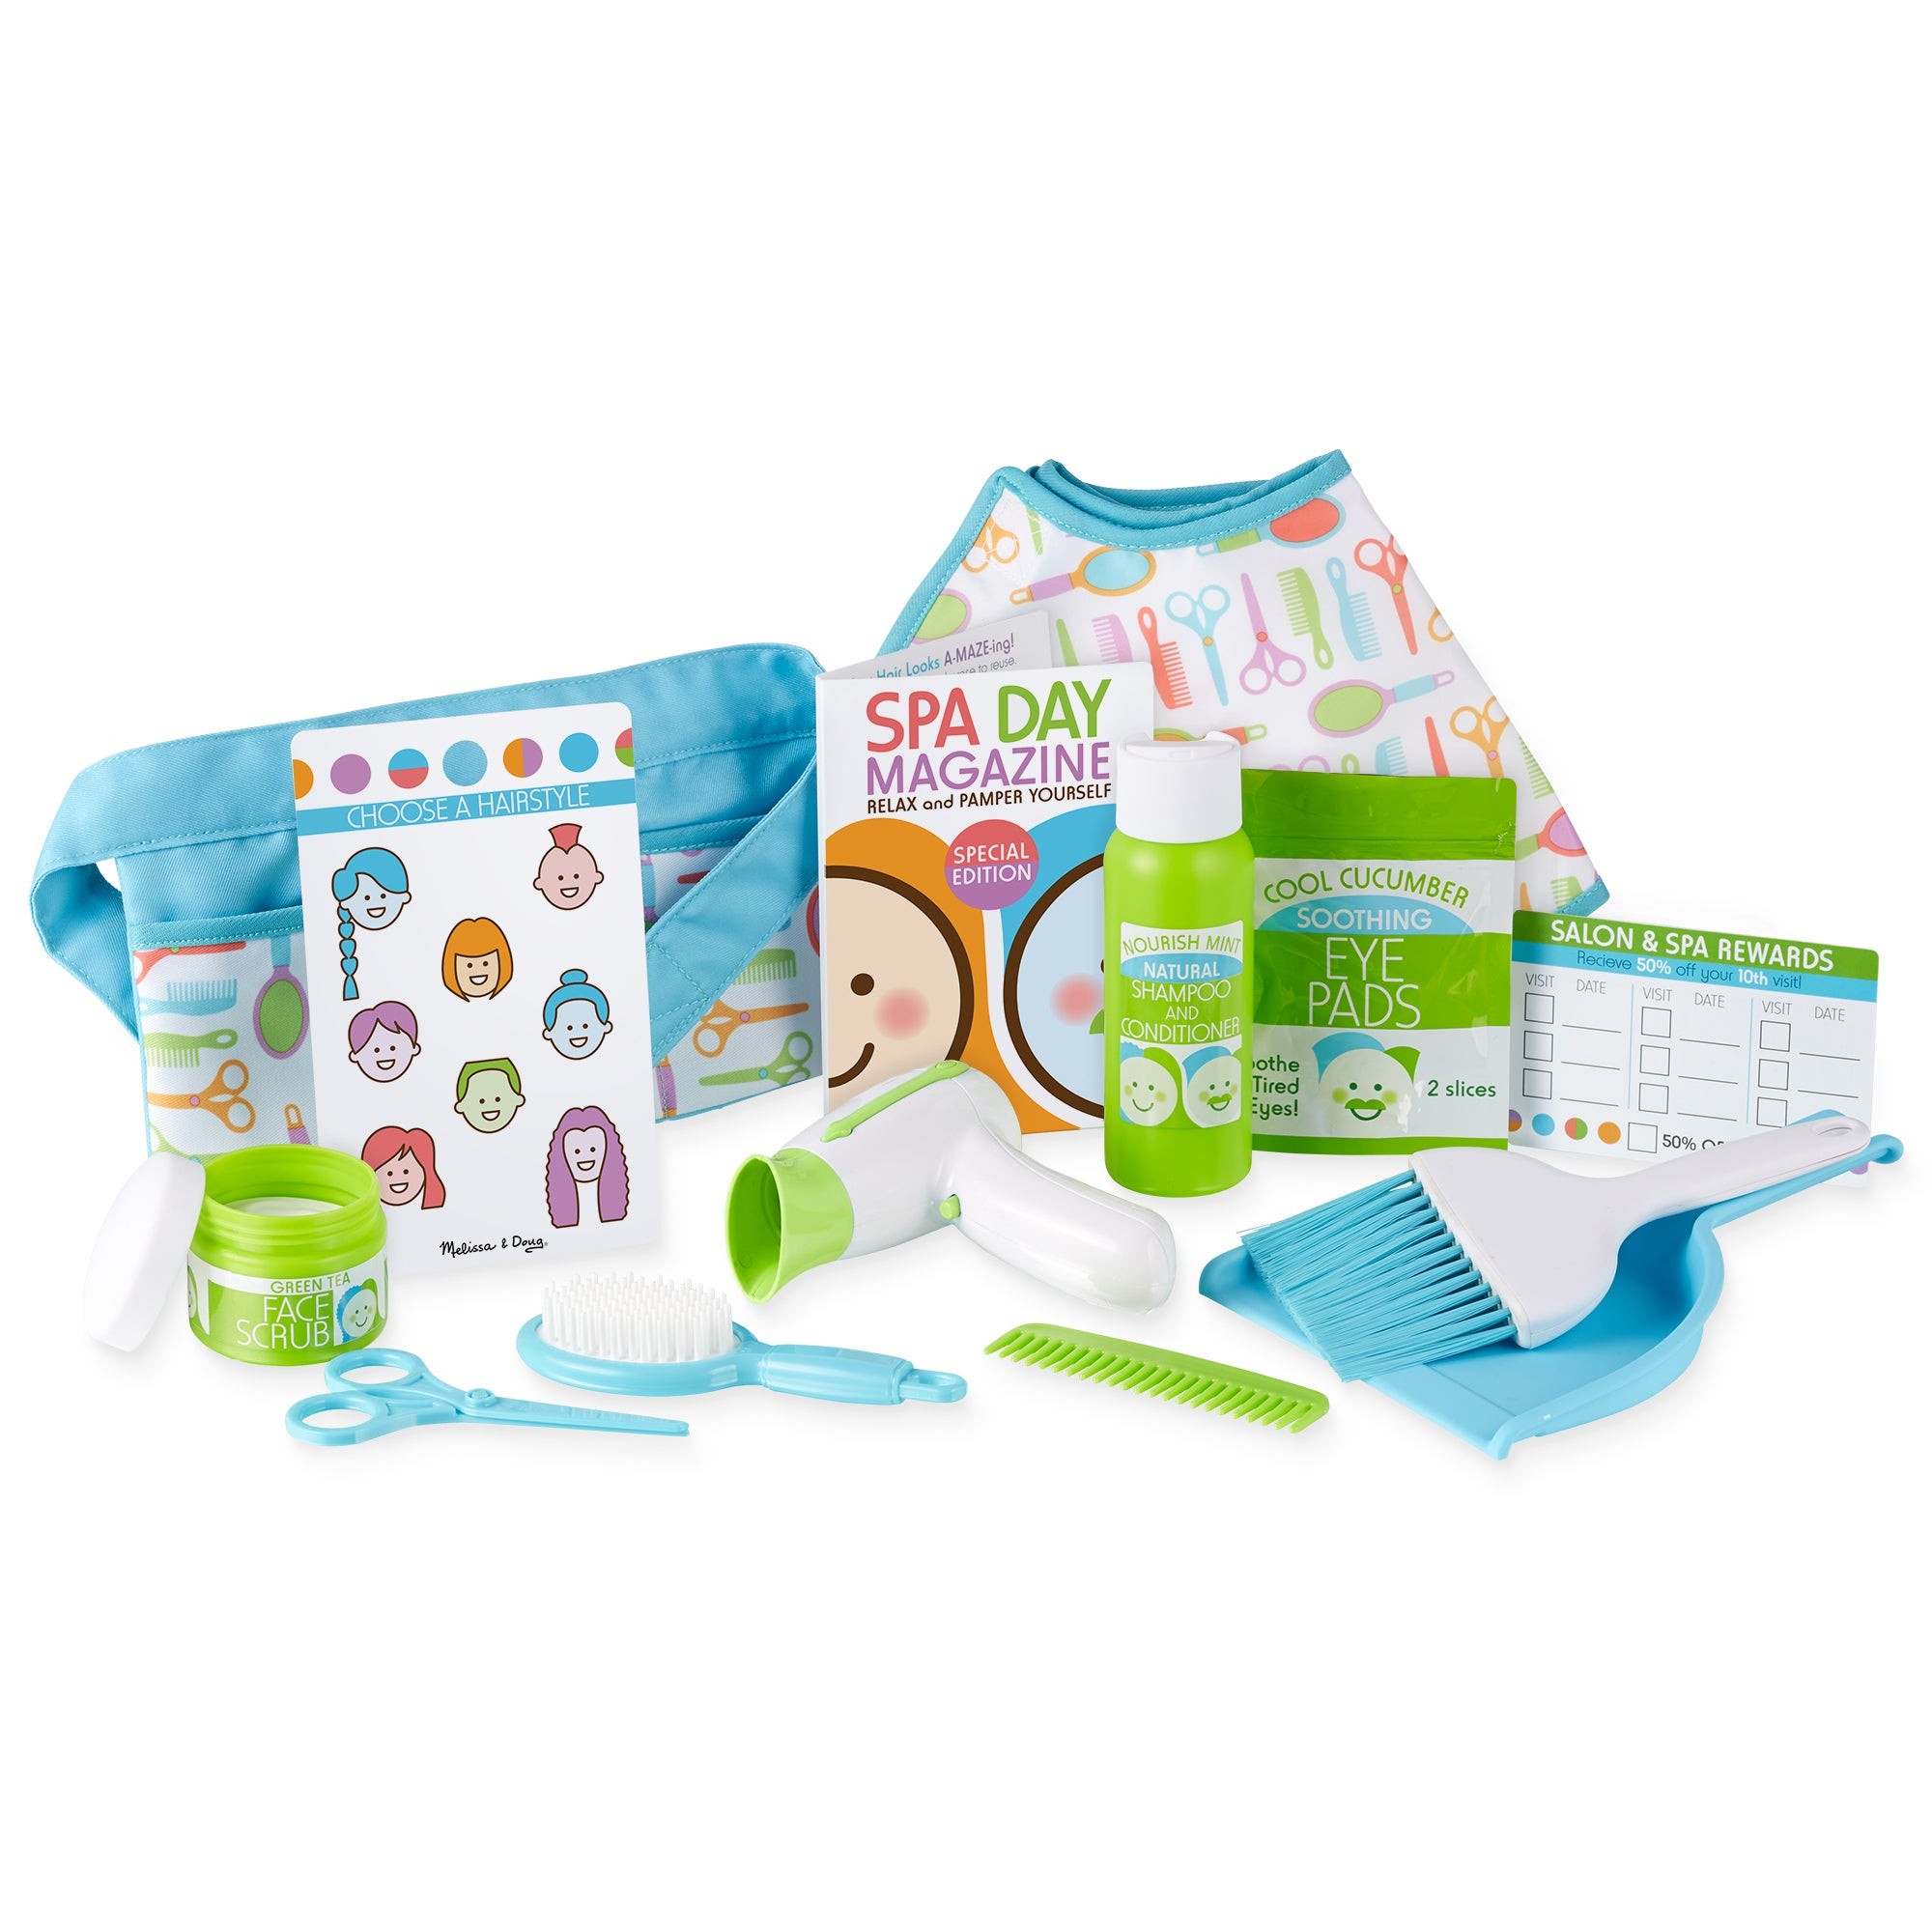 LOVE YOUR LOOK: Salon & Spa Play Set Ages 3+ Years